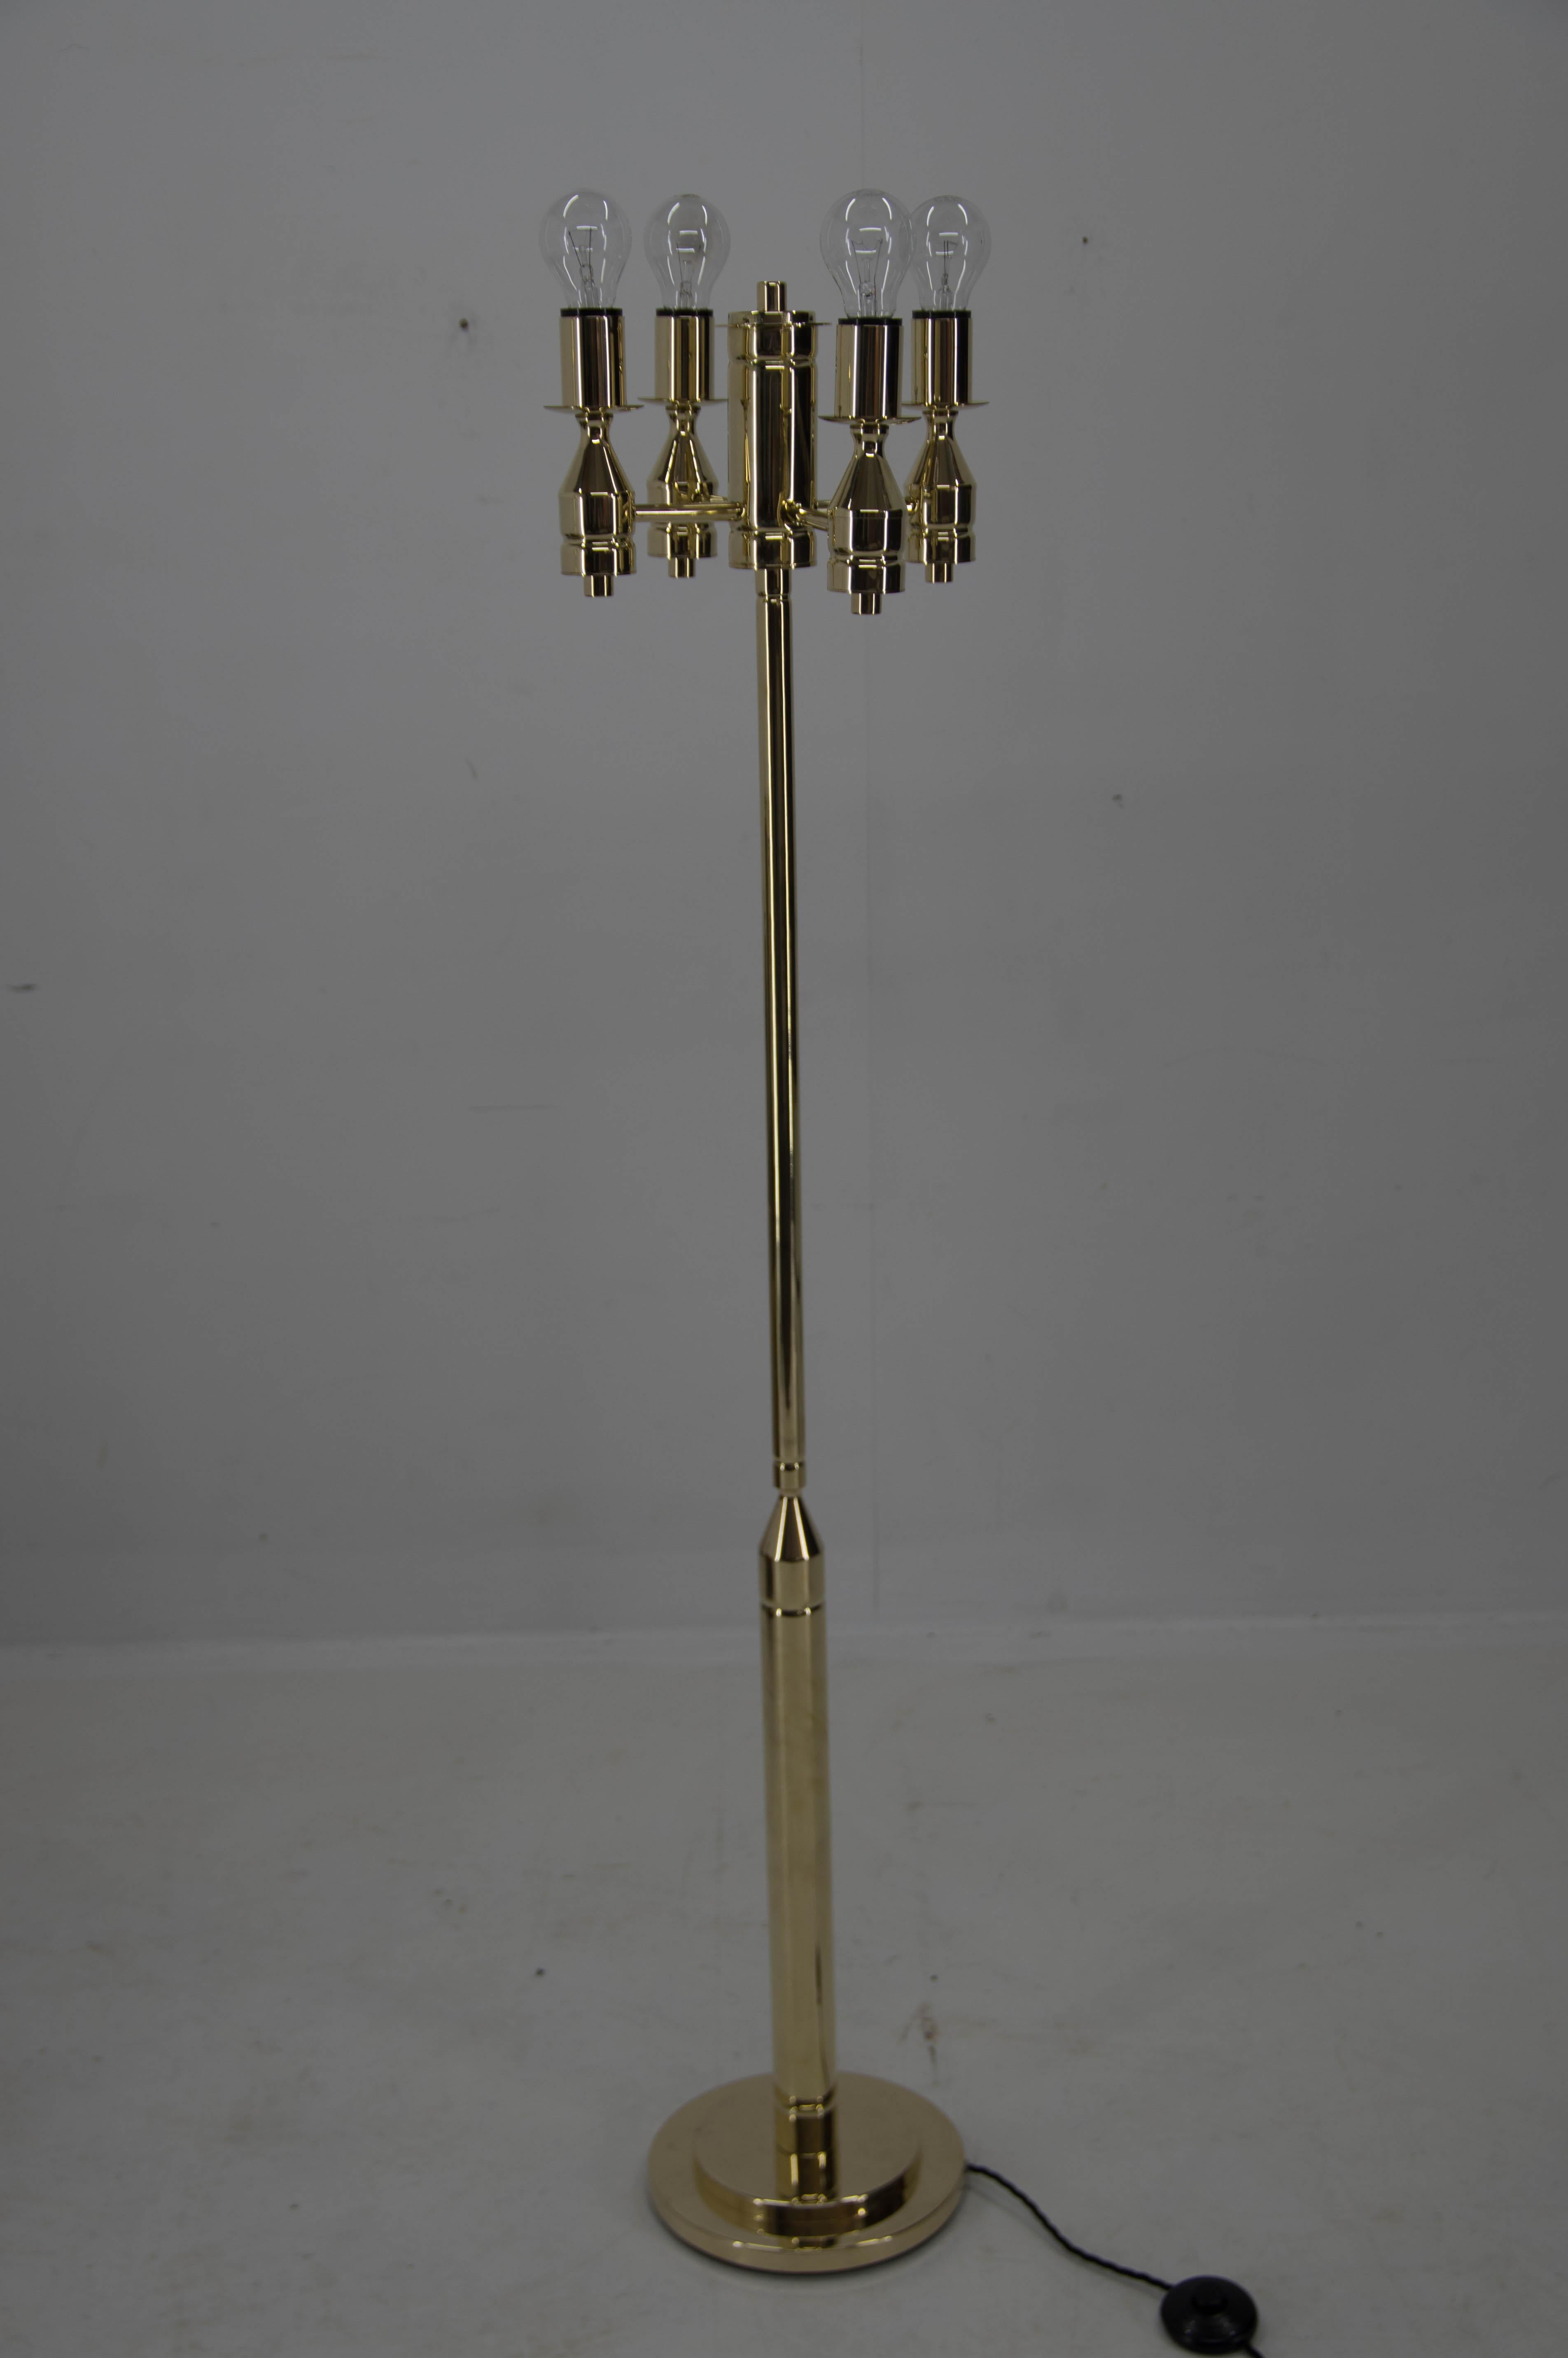 All brass 4-flamming floor lamp.
Restored: brass polished
Rewired: 4x60W,E25-E27 bulbs
US plug adapter included.